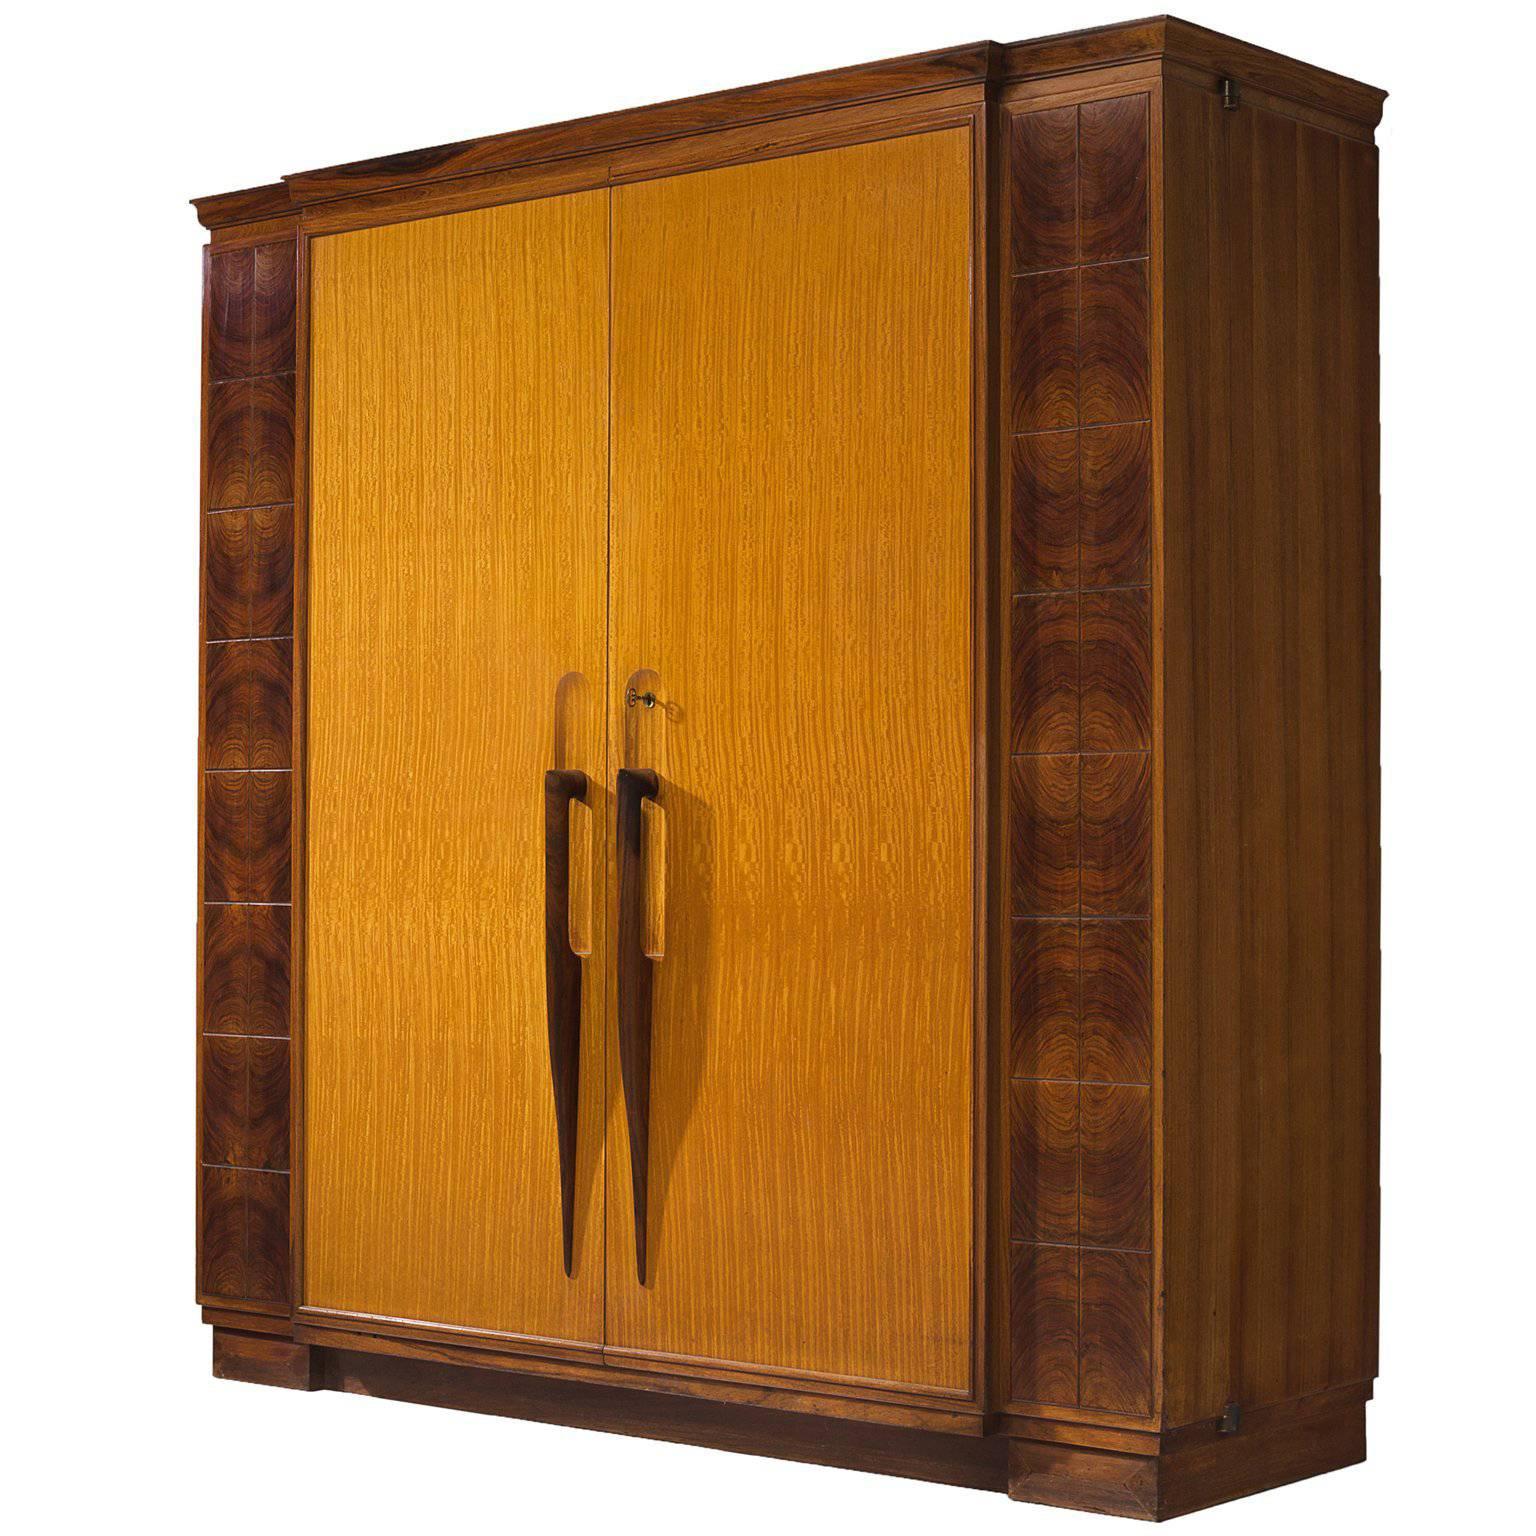 Italian Wardrobe with Hand-Carved Detailing, circa 1951